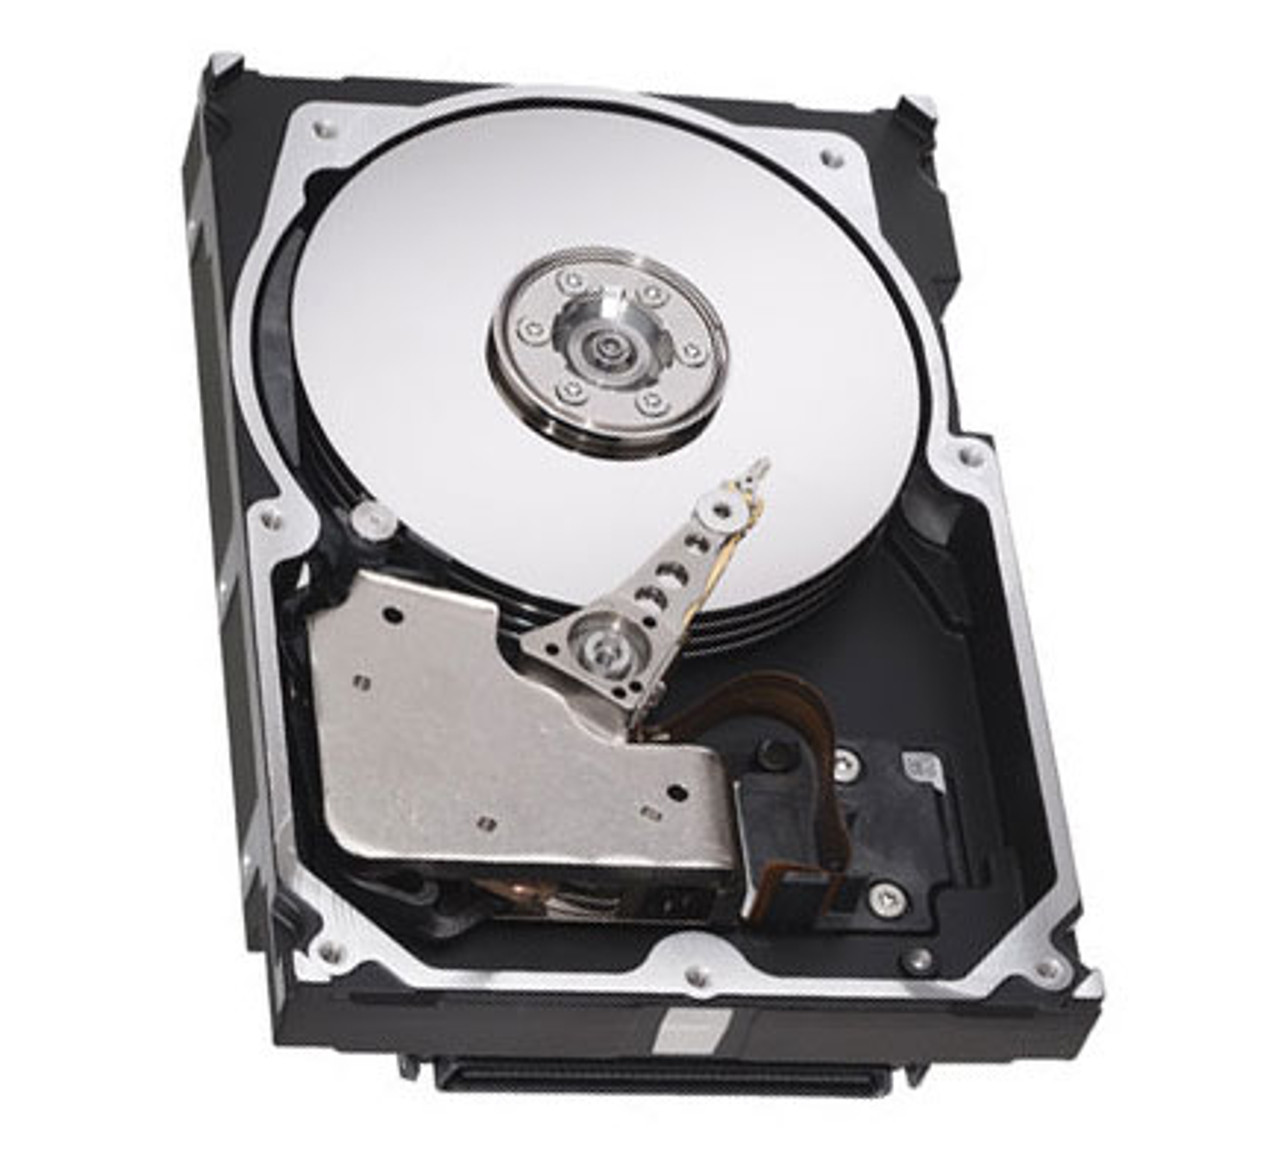 053MUF Dell 18GB 10000RPM Ultra-160 SCSI 80-Pin Hot Swap 4MB Cache 3.5-inch Internal Hard Drive with Tray